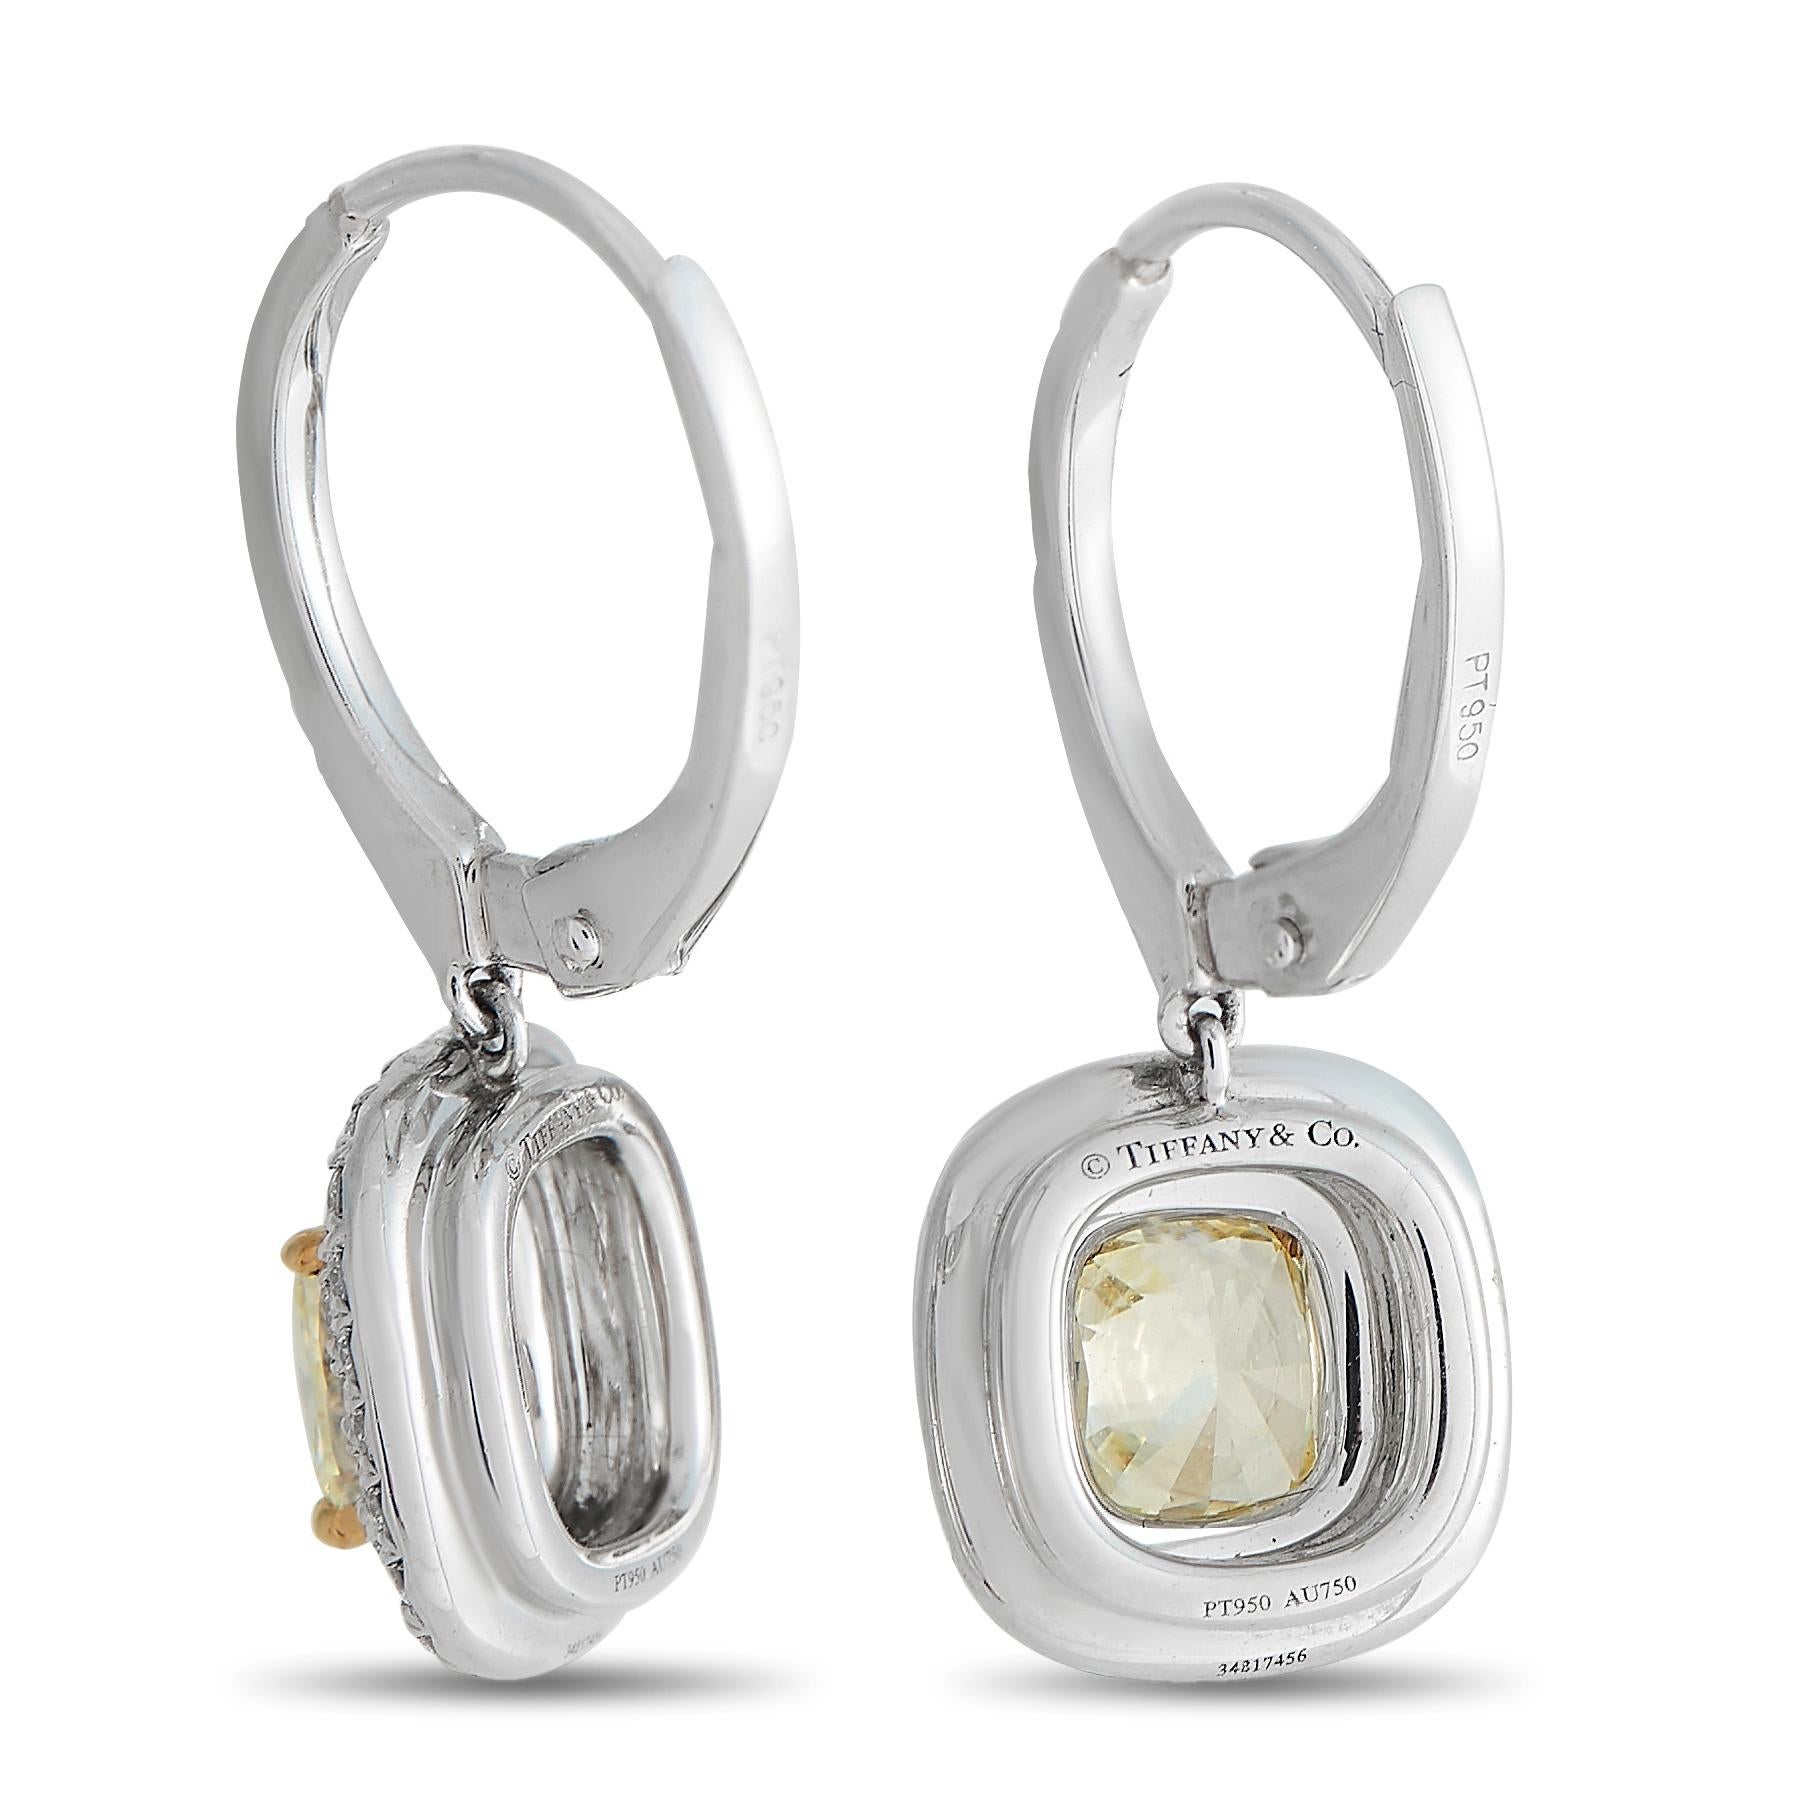 These Tiffany & Co. Soleste earrings will always make a scintillating statement. At the center of the sophisticated 18K White Gold setting, cushion-cut Fancy Yellow Diamonds add a pop of color to the elegant design. Each one measures 0.85” long and